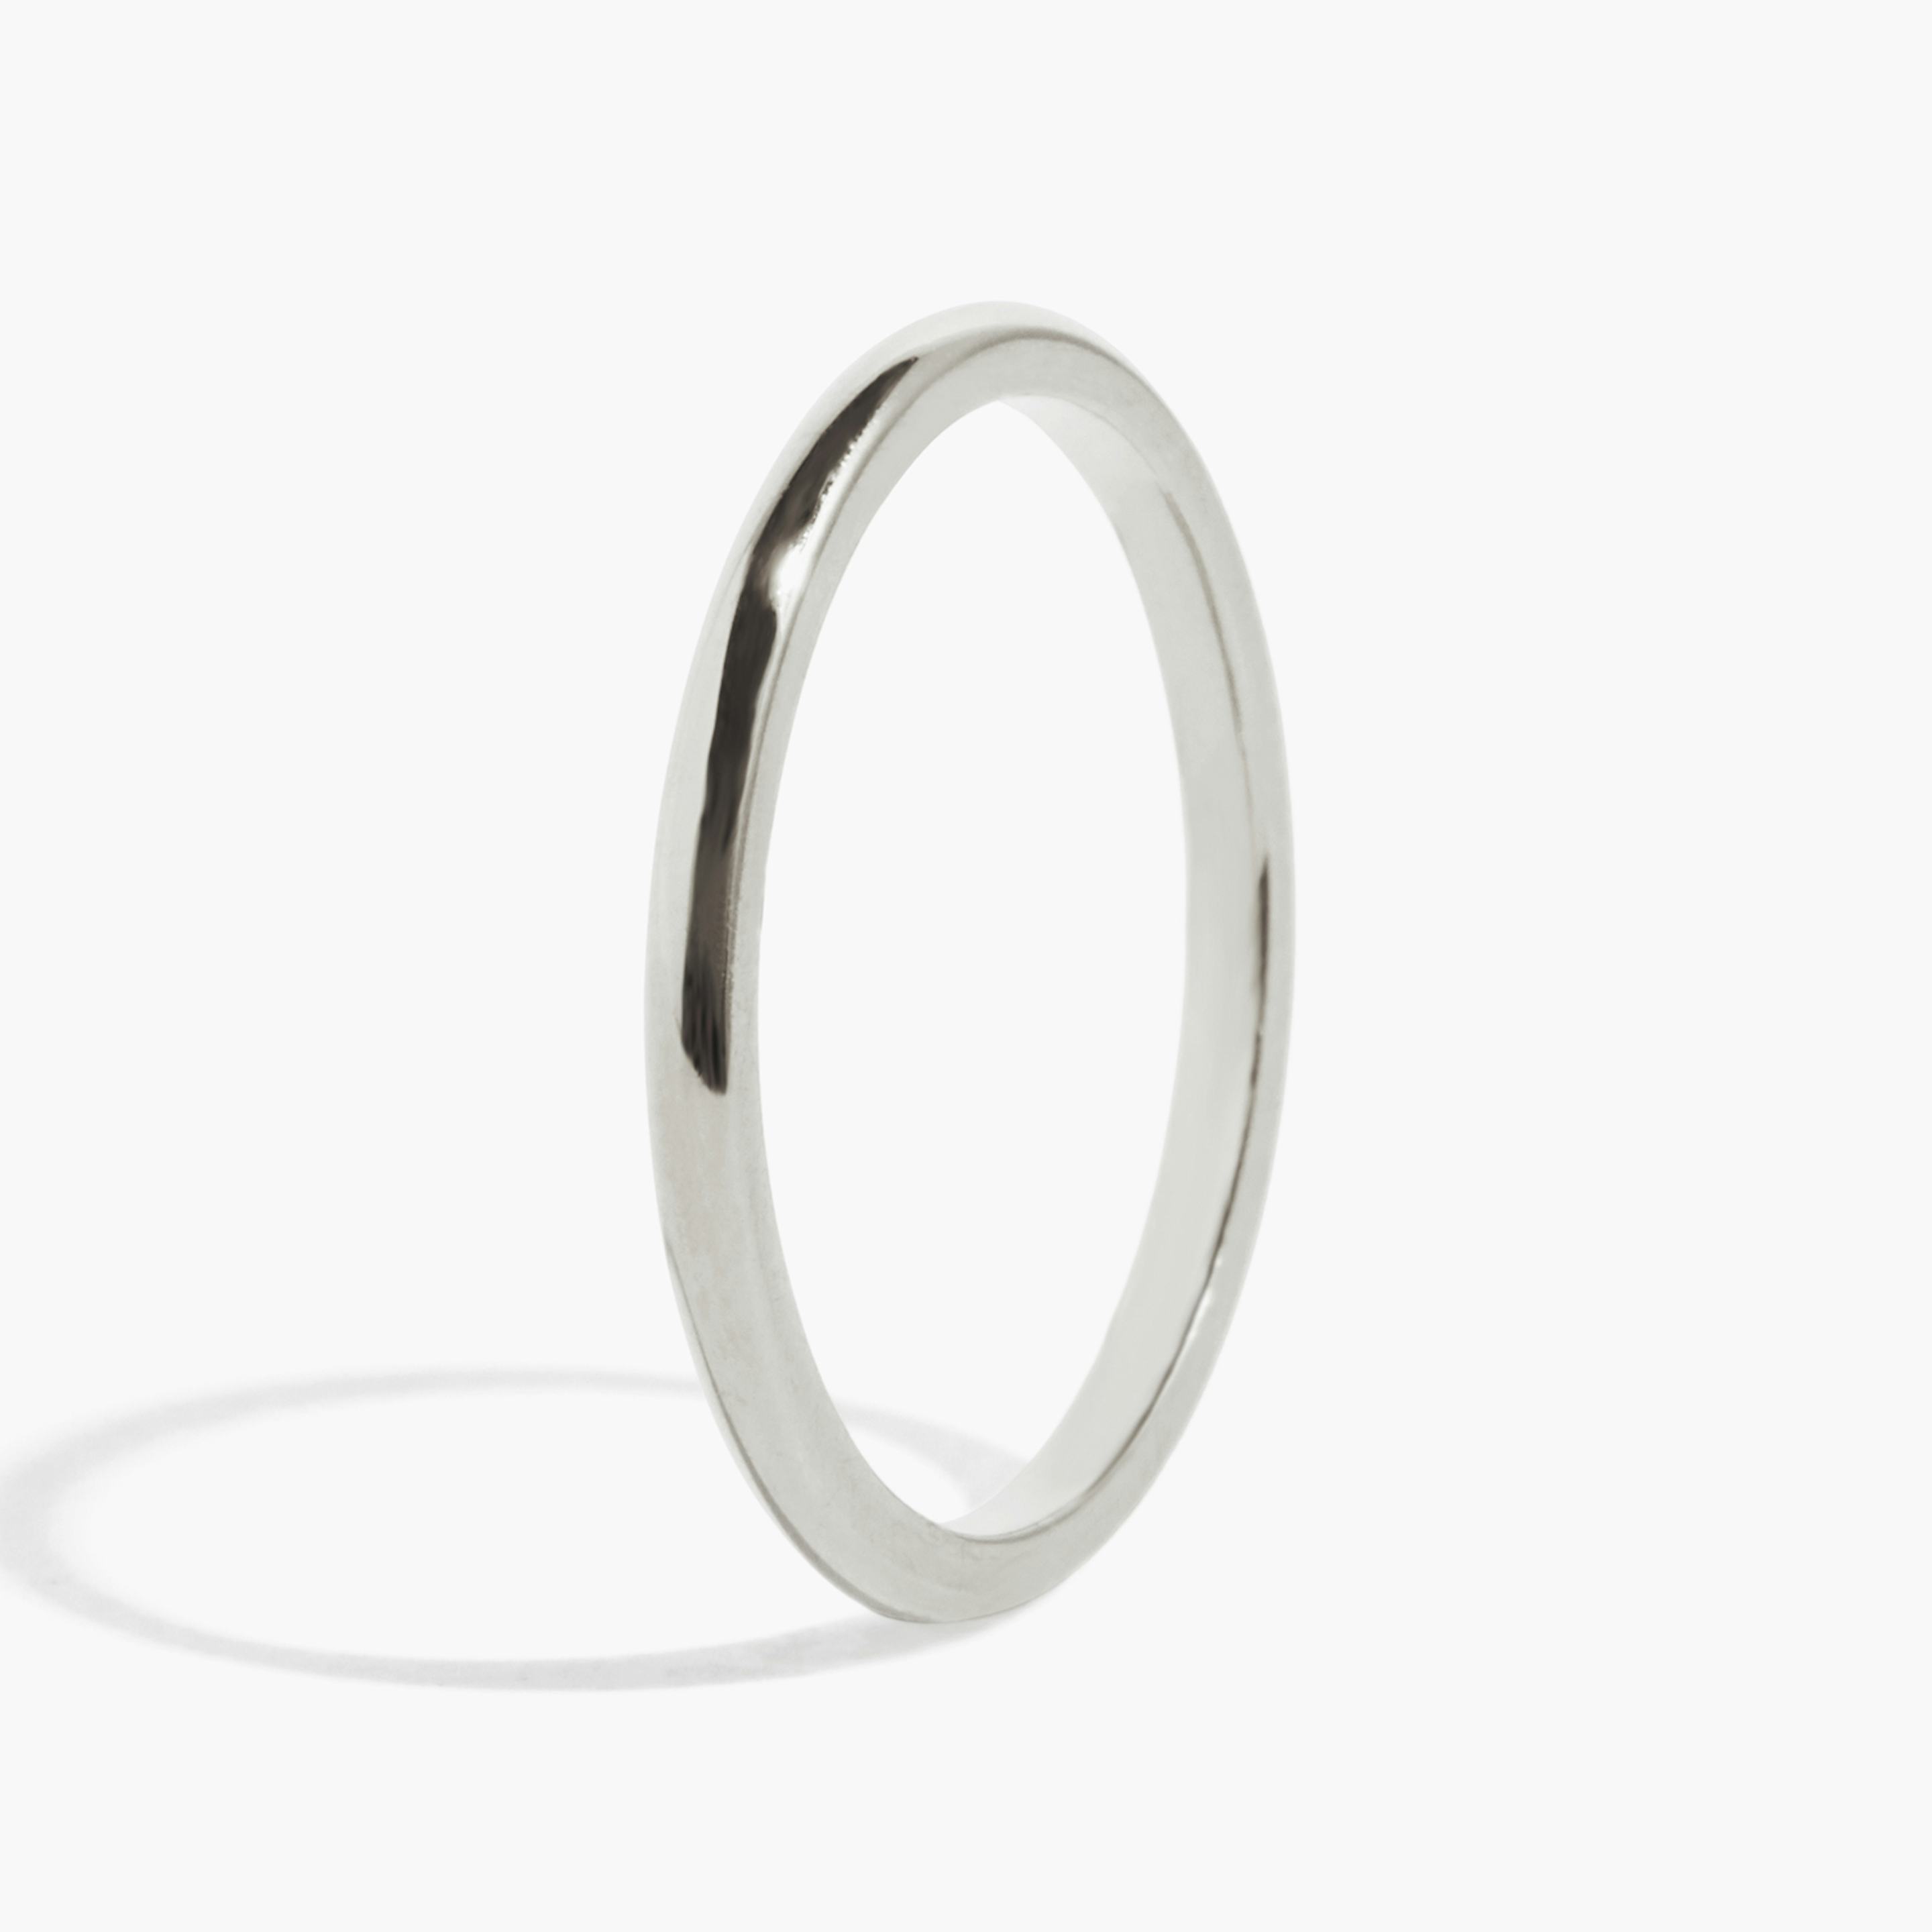 The Round | Platinum | Band width: Small - 1.5mm